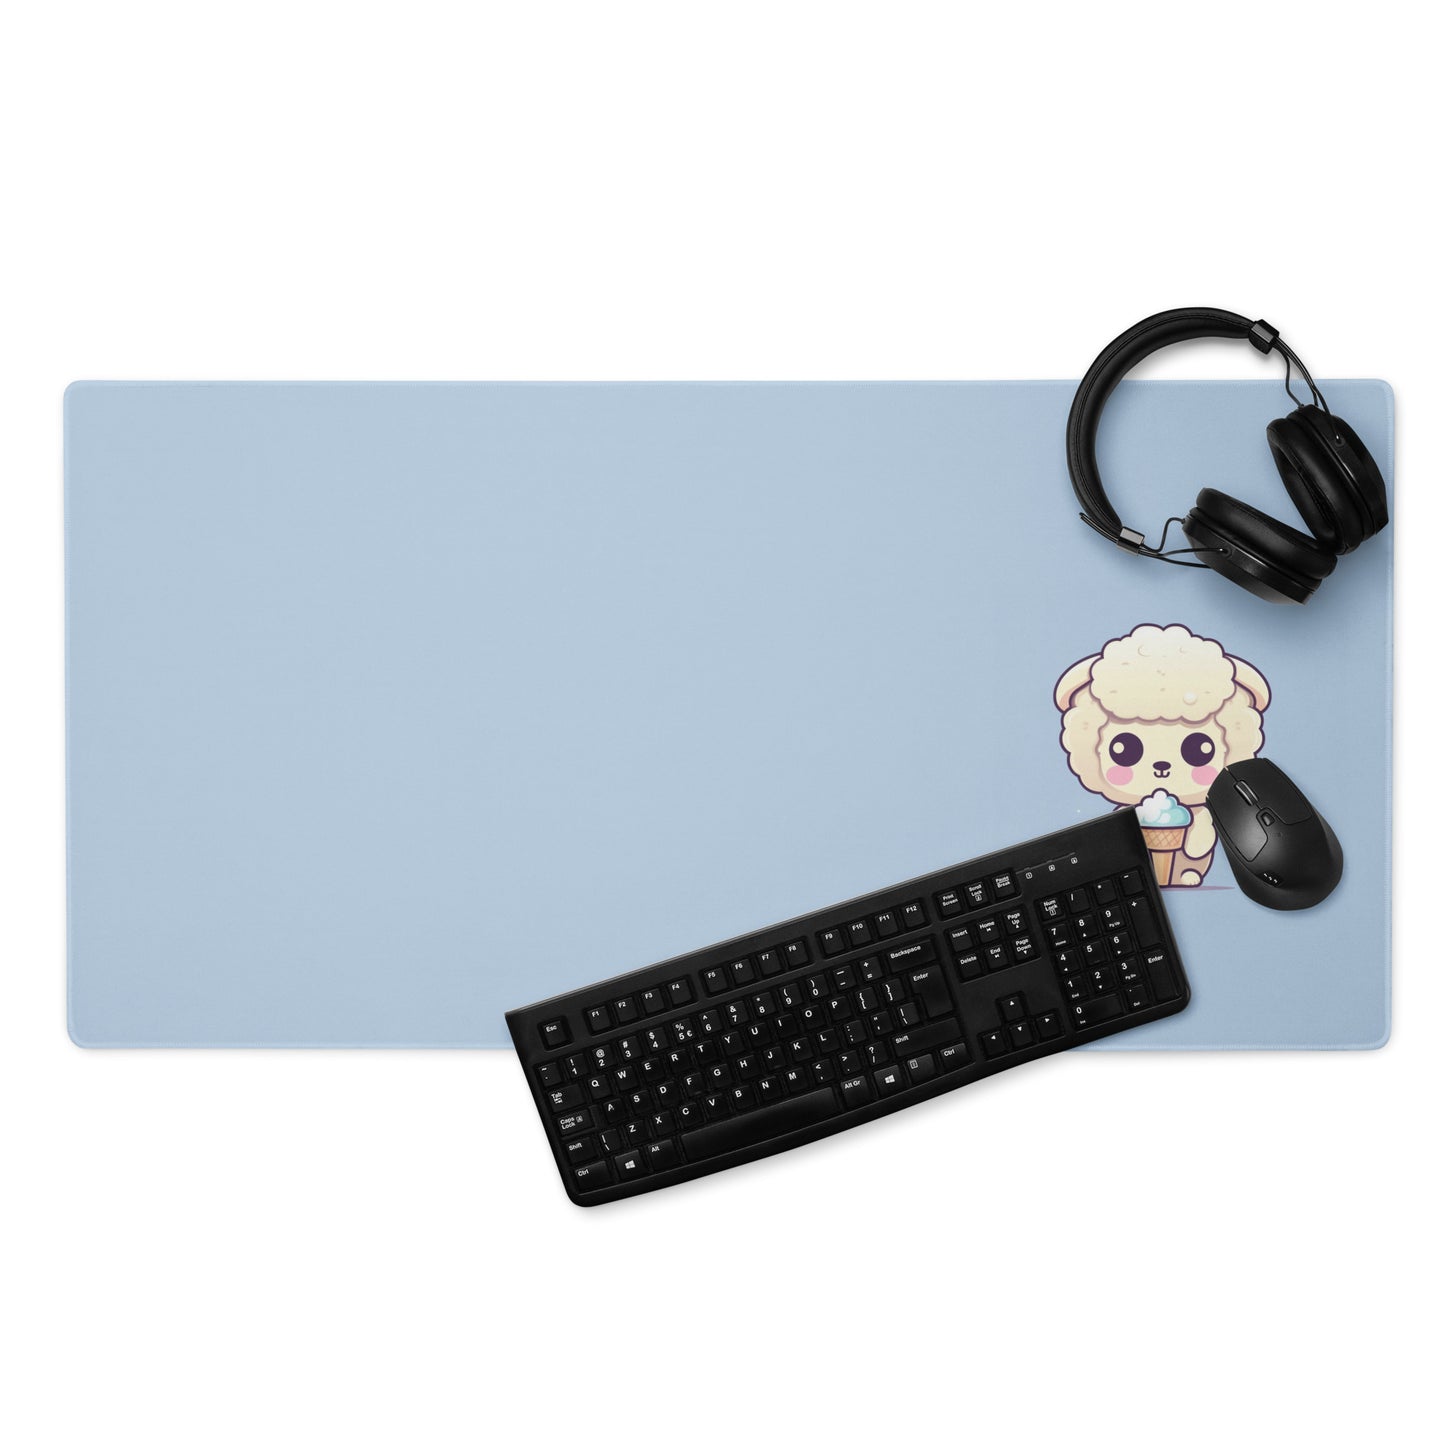 A 36" x 18" desk pad with a cute sheep eating ice cream on it displayed with a keyboard, headphones and a mouse. Blue in color.